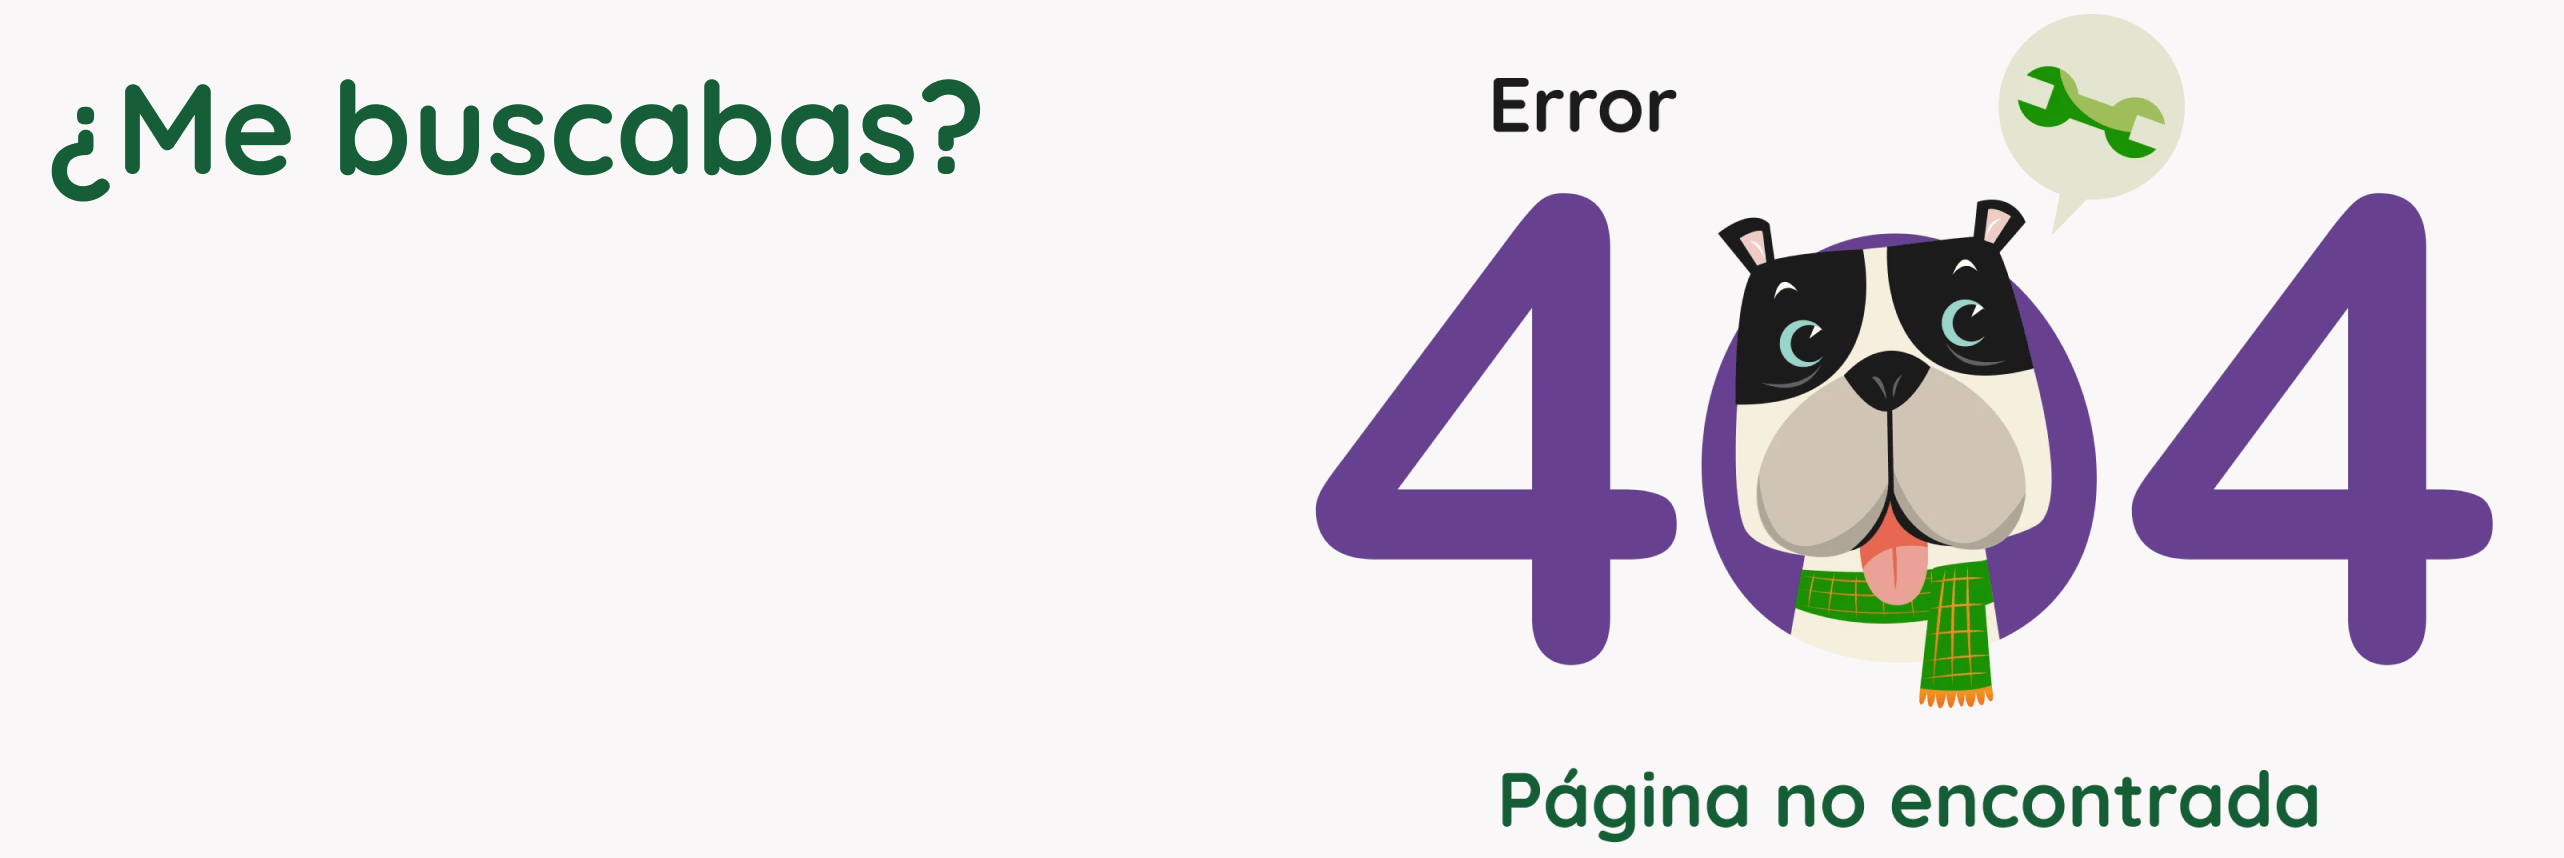 PAGE NOT FOUND 404